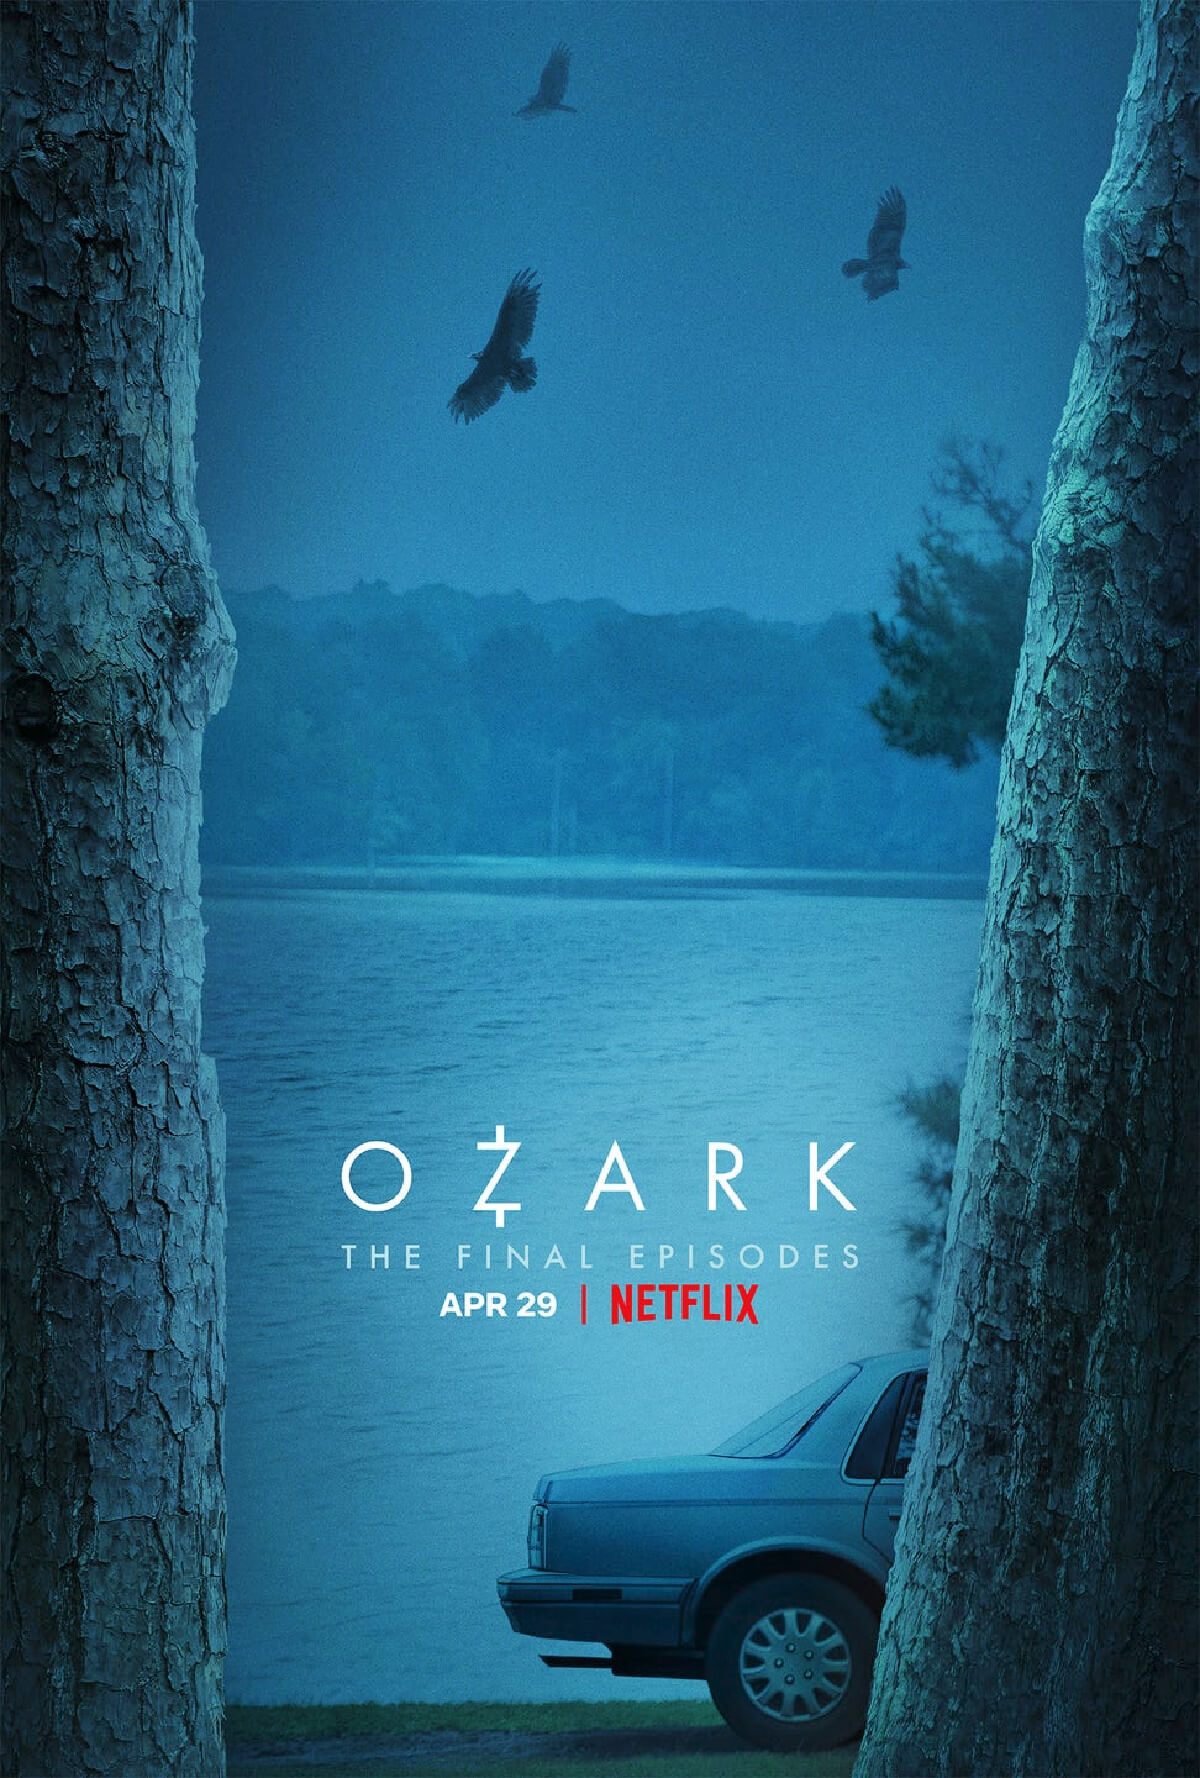 Connecting The Dots Of The Netflix Series Ozark